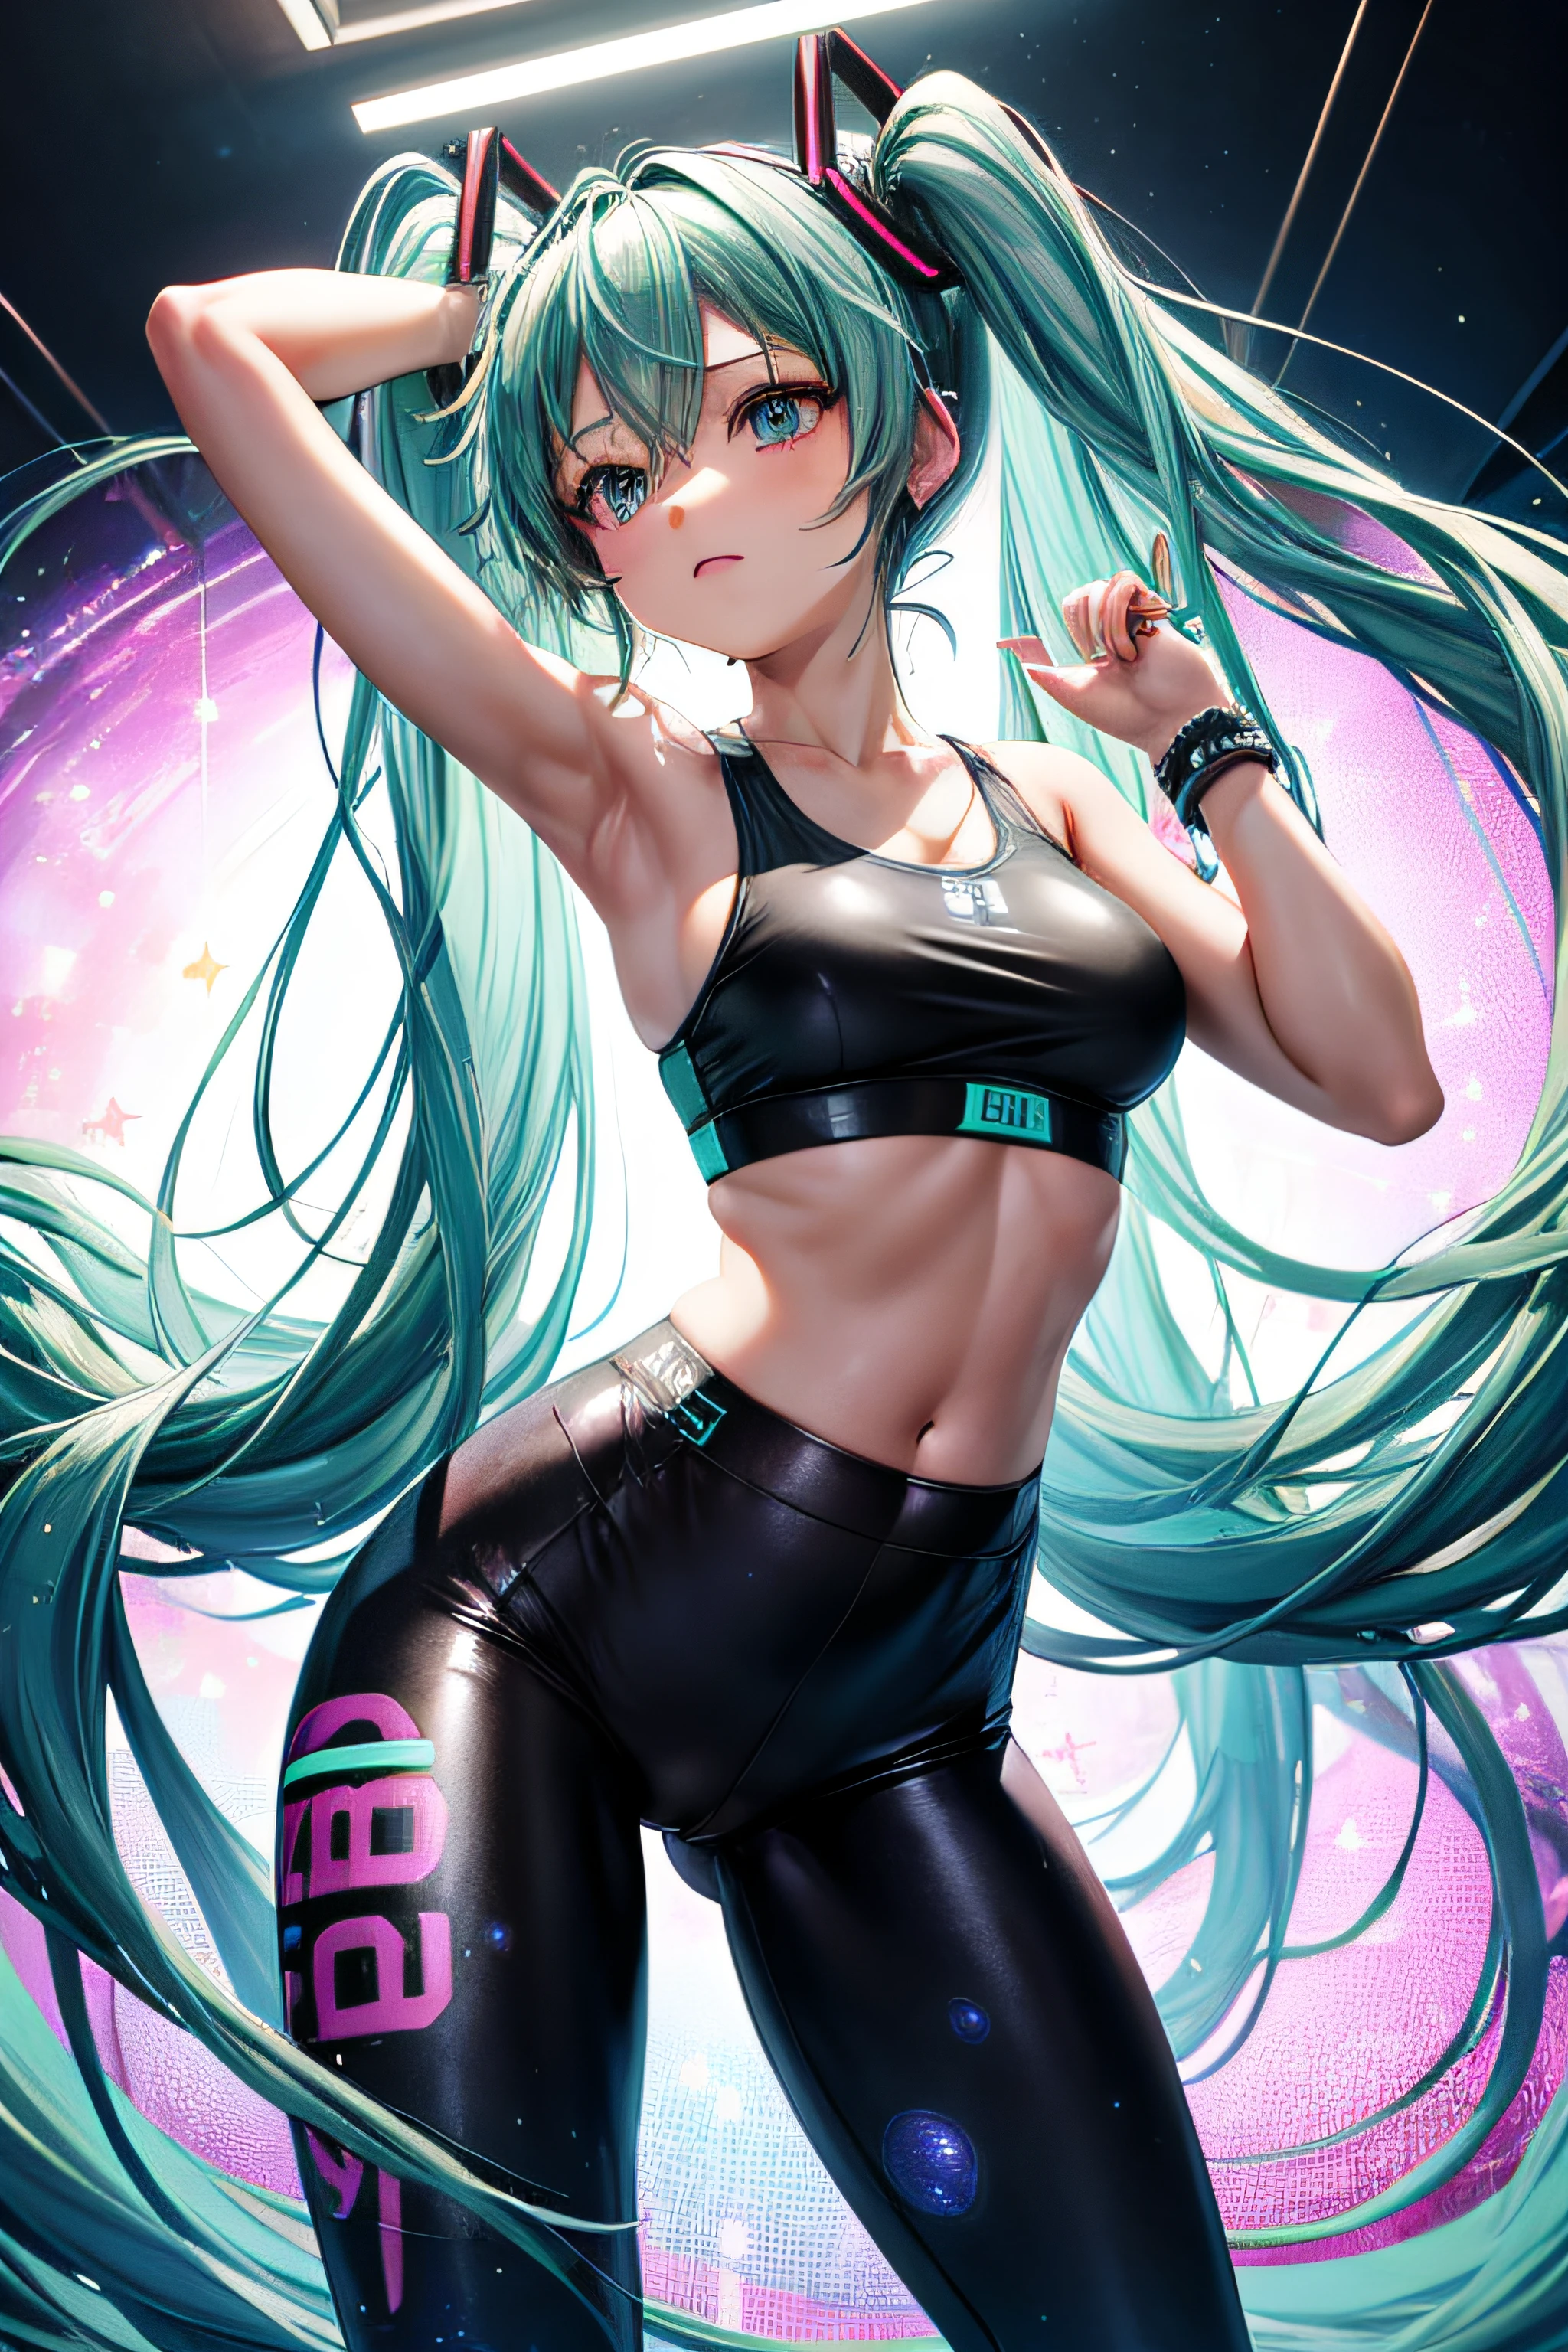 hatsune miku getting breasts grabbed, wearing tight galaxy print leggings with a cameltoe, medium breasts, wearing a galaxy print sports bra